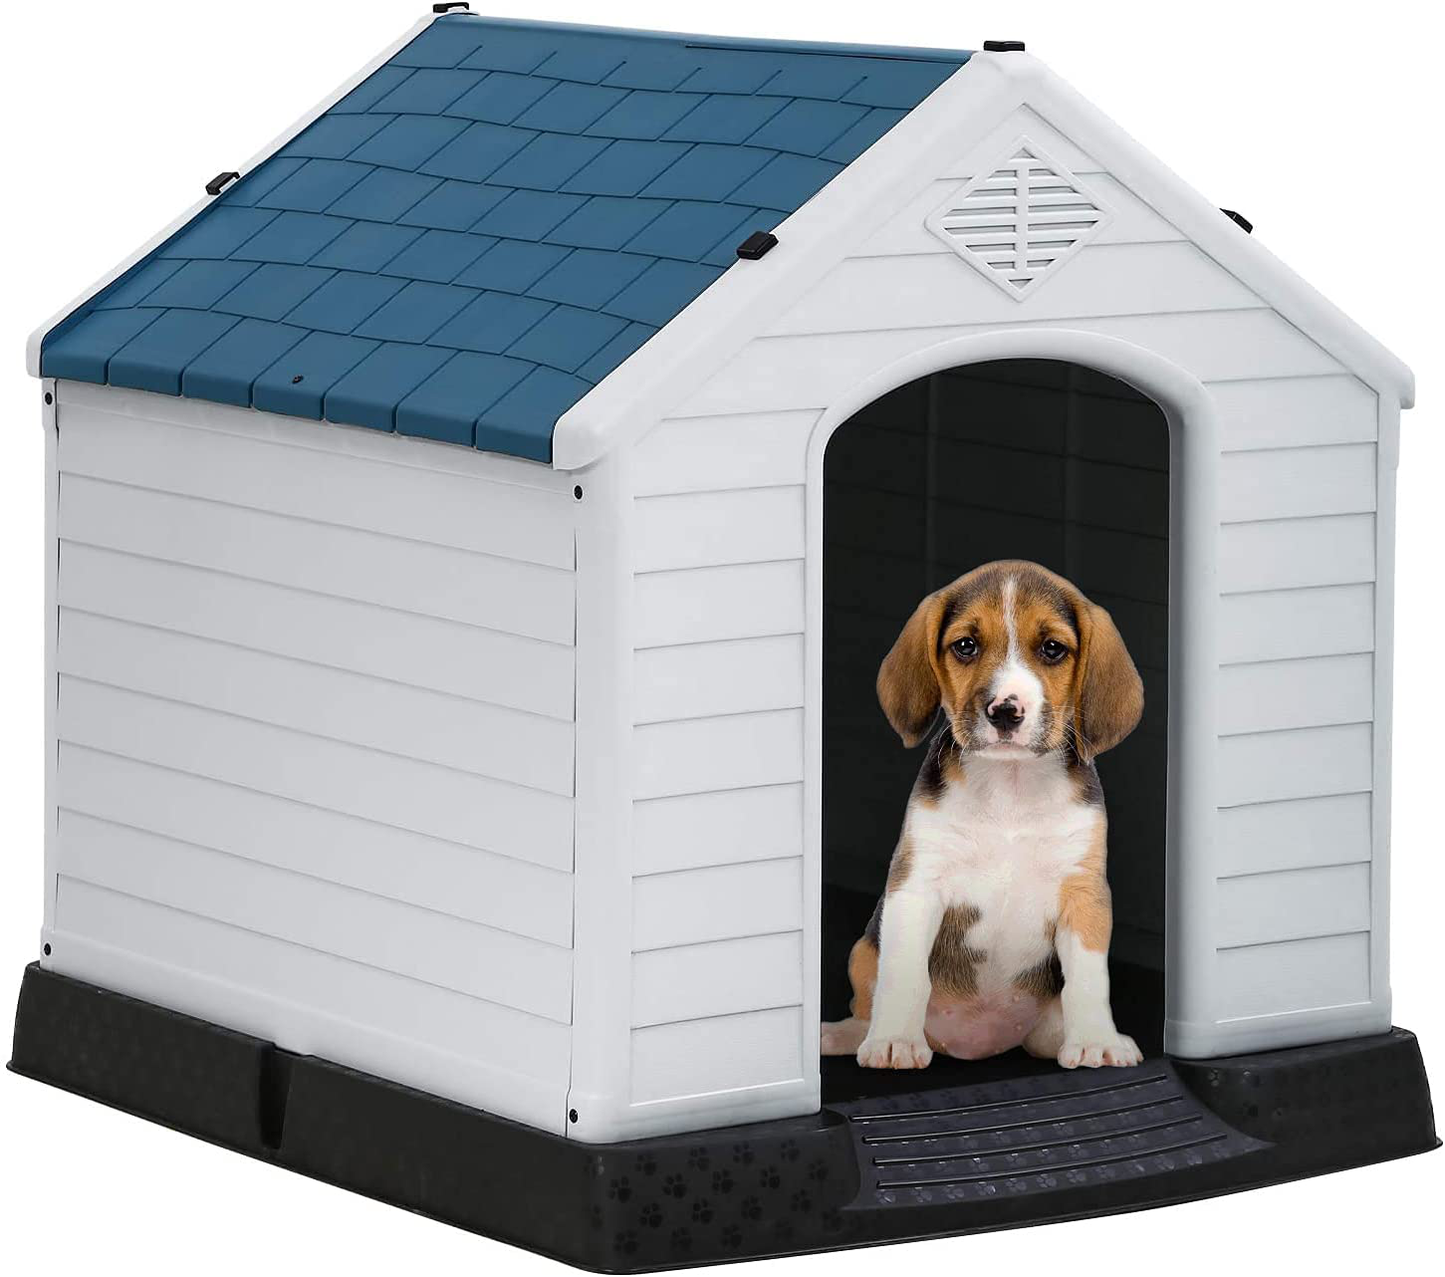 Bestpet Large Dog House Insulated Kennel Durable Plastic Dog House for Small Medium Large Dogs Indoor Outdoor Weather & Water Resistant Pet Crate with Air Vents and Elevated Floor Animals & Pet Supplies > Pet Supplies > Dog Supplies > Dog Houses BestPet 41Lx37Wx39H  